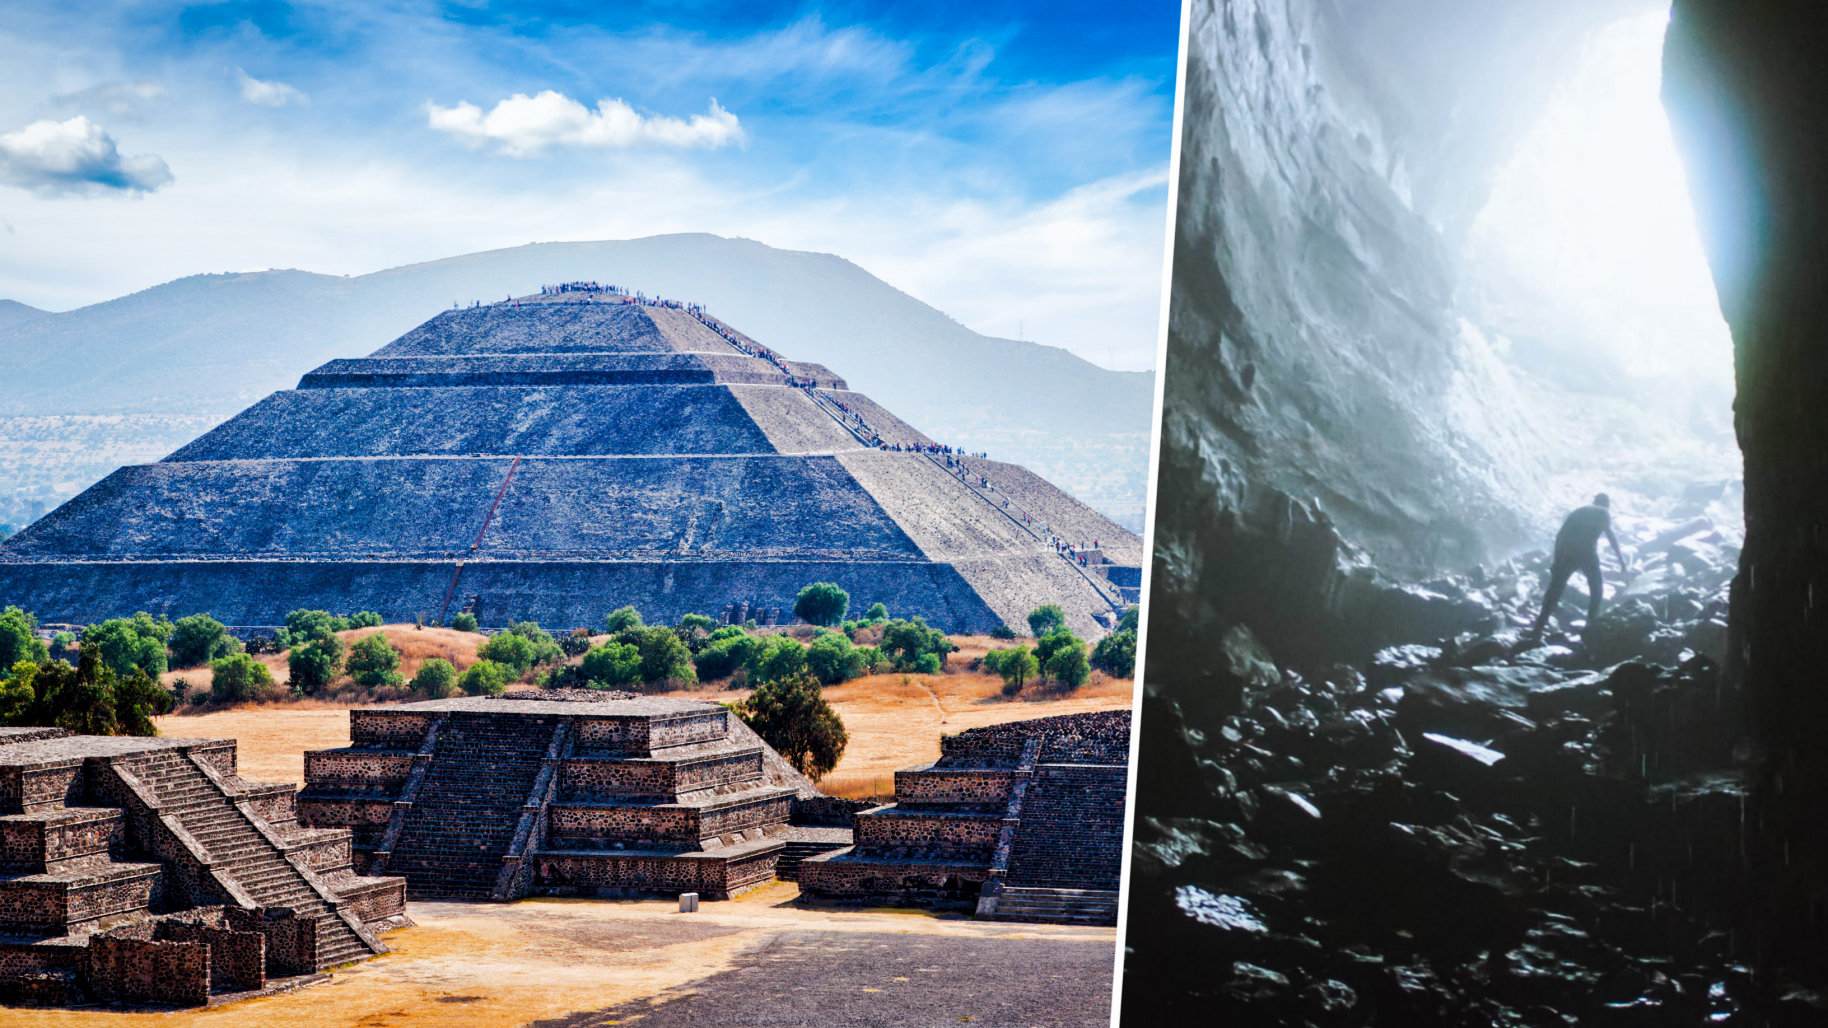 The 'passage to the underworld' discovered beneath the Pyramid of the Moon in Teotihuacán 2